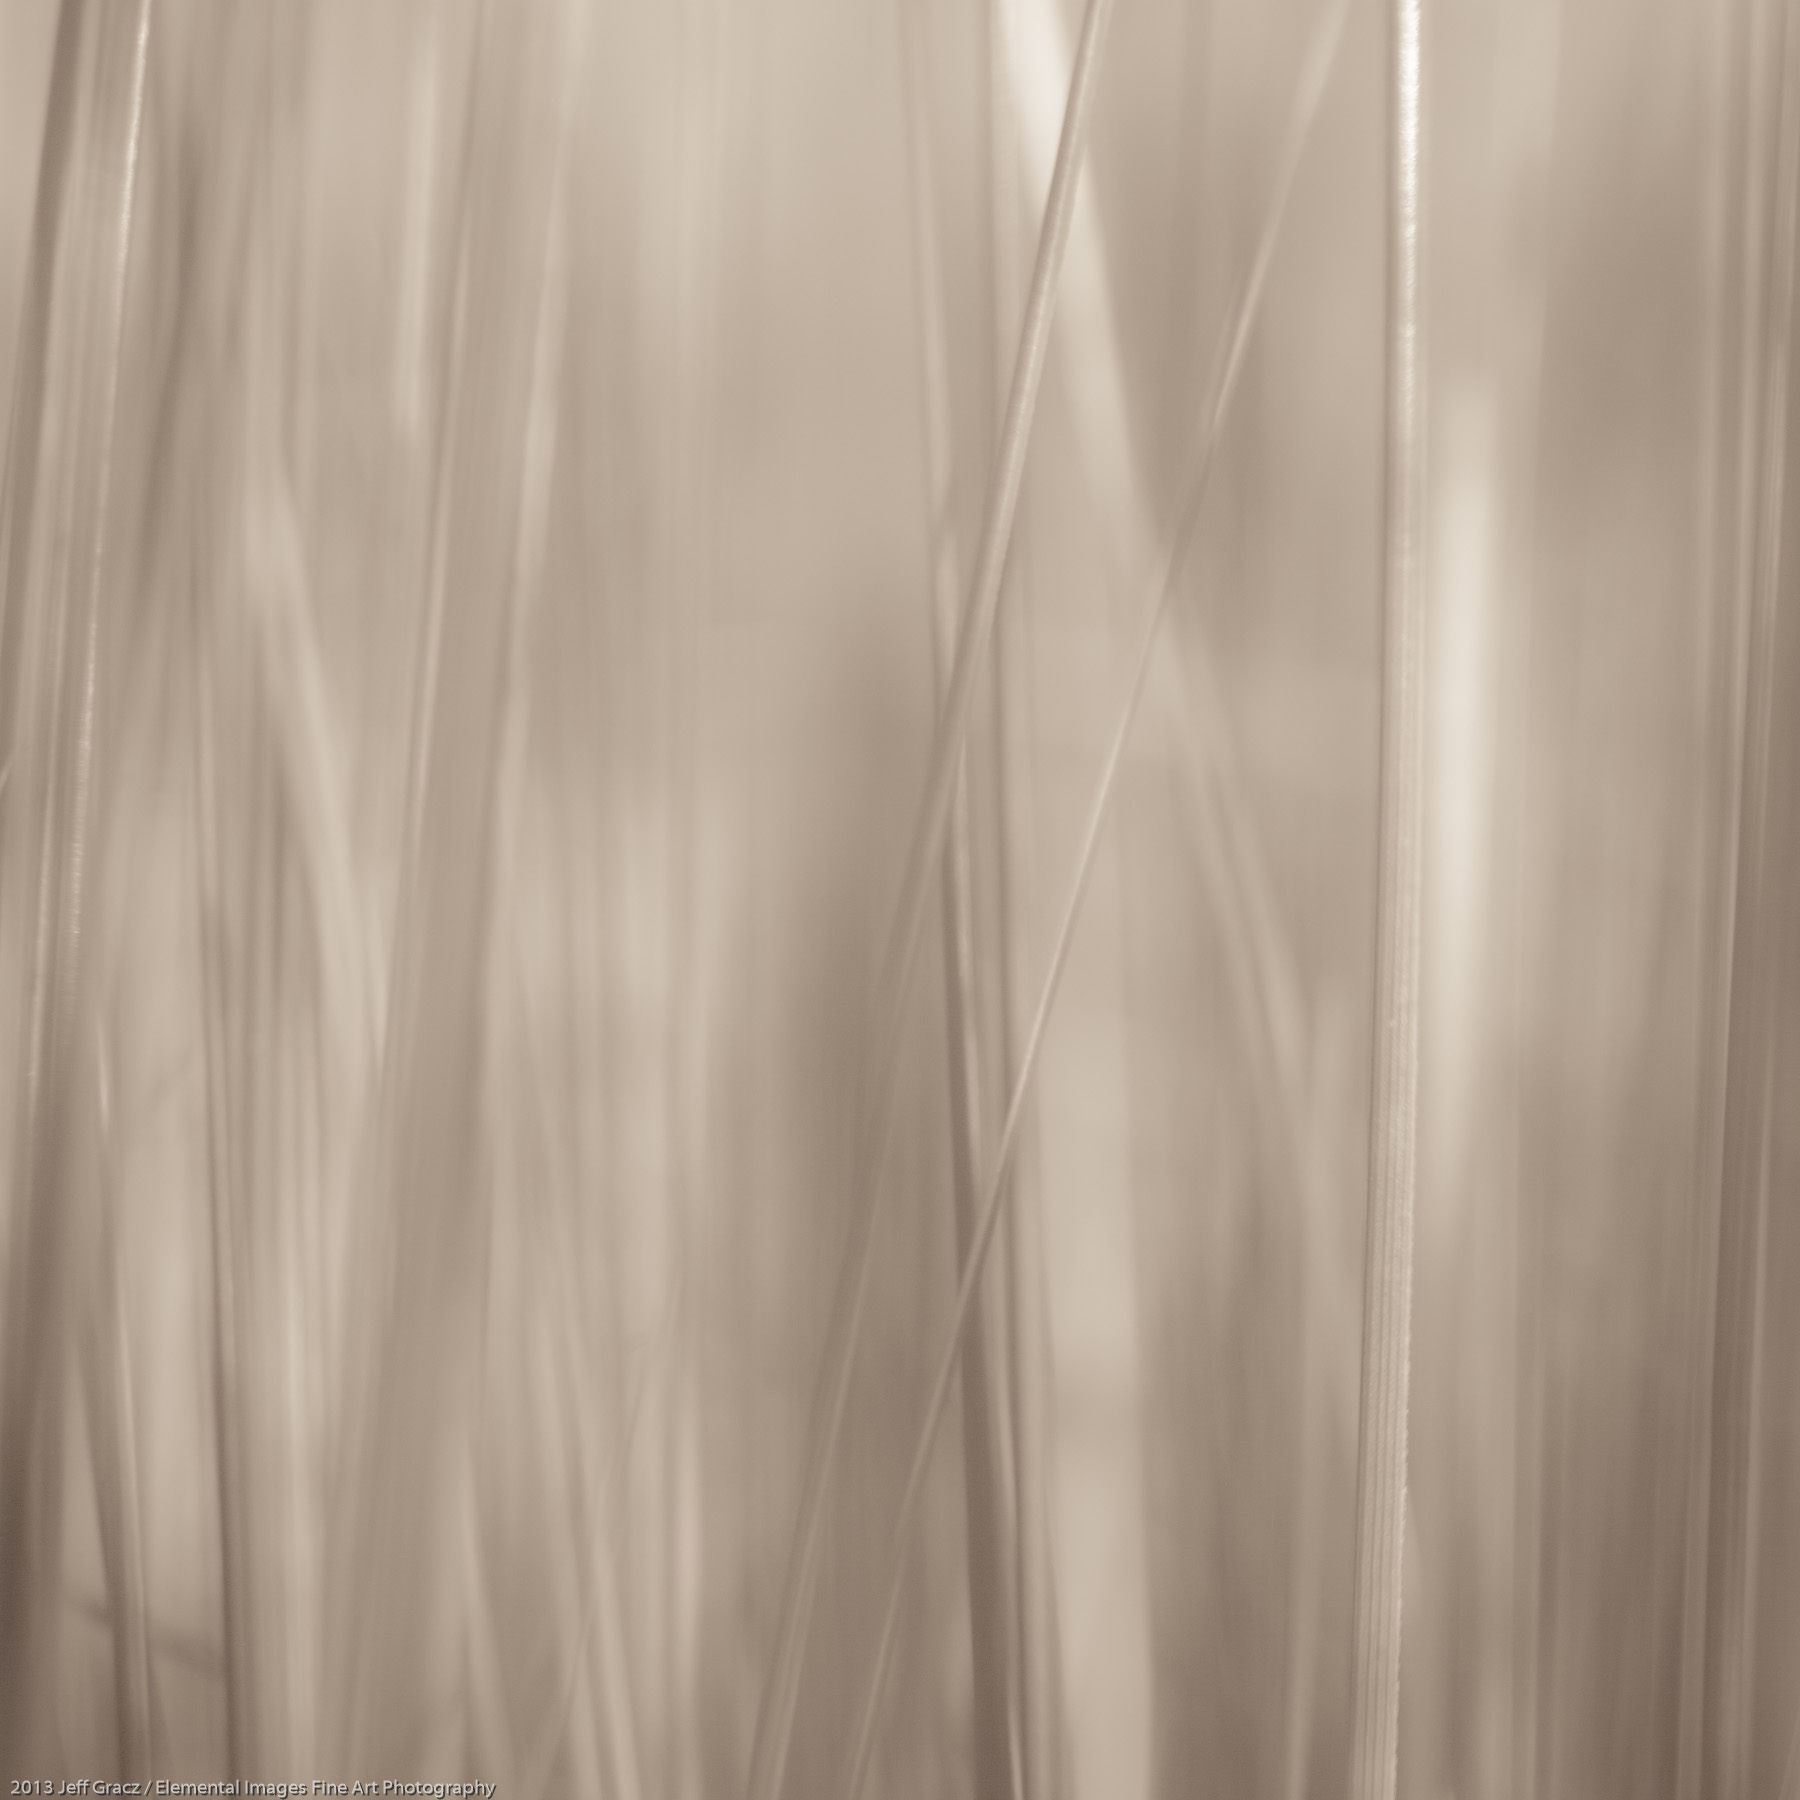 Grasses LIV | Portland | OR | USA - © 2013 Jeff Gracz / Elemental Images Fine Art Photography - All Rights Reserved Worldwide